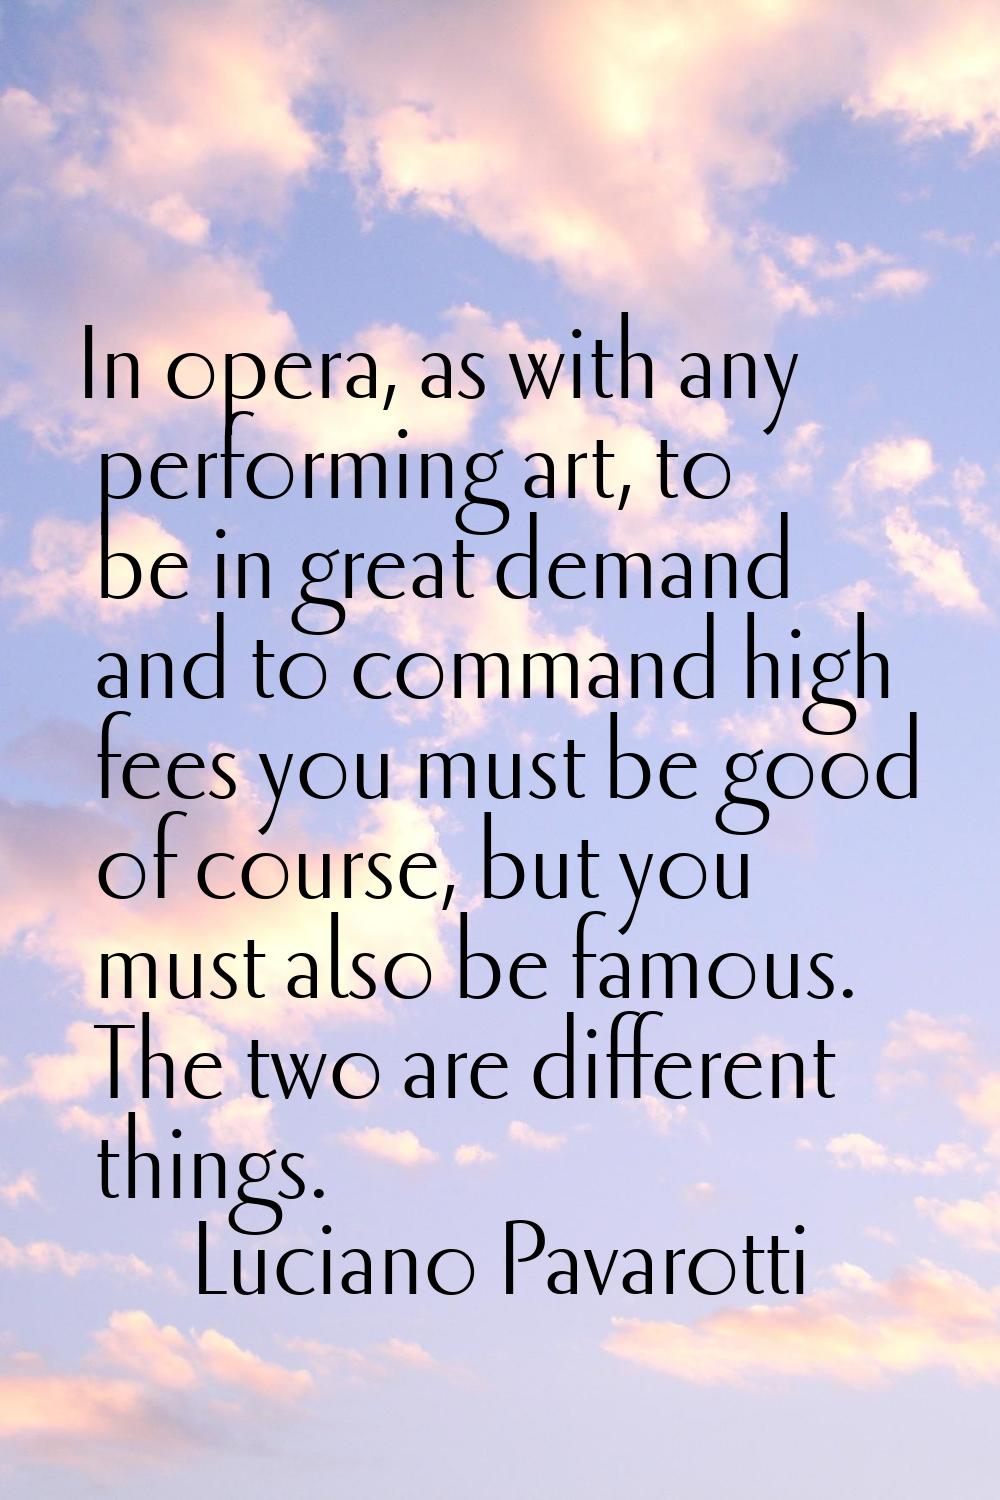 In opera, as with any performing art, to be in great demand and to command high fees you must be go